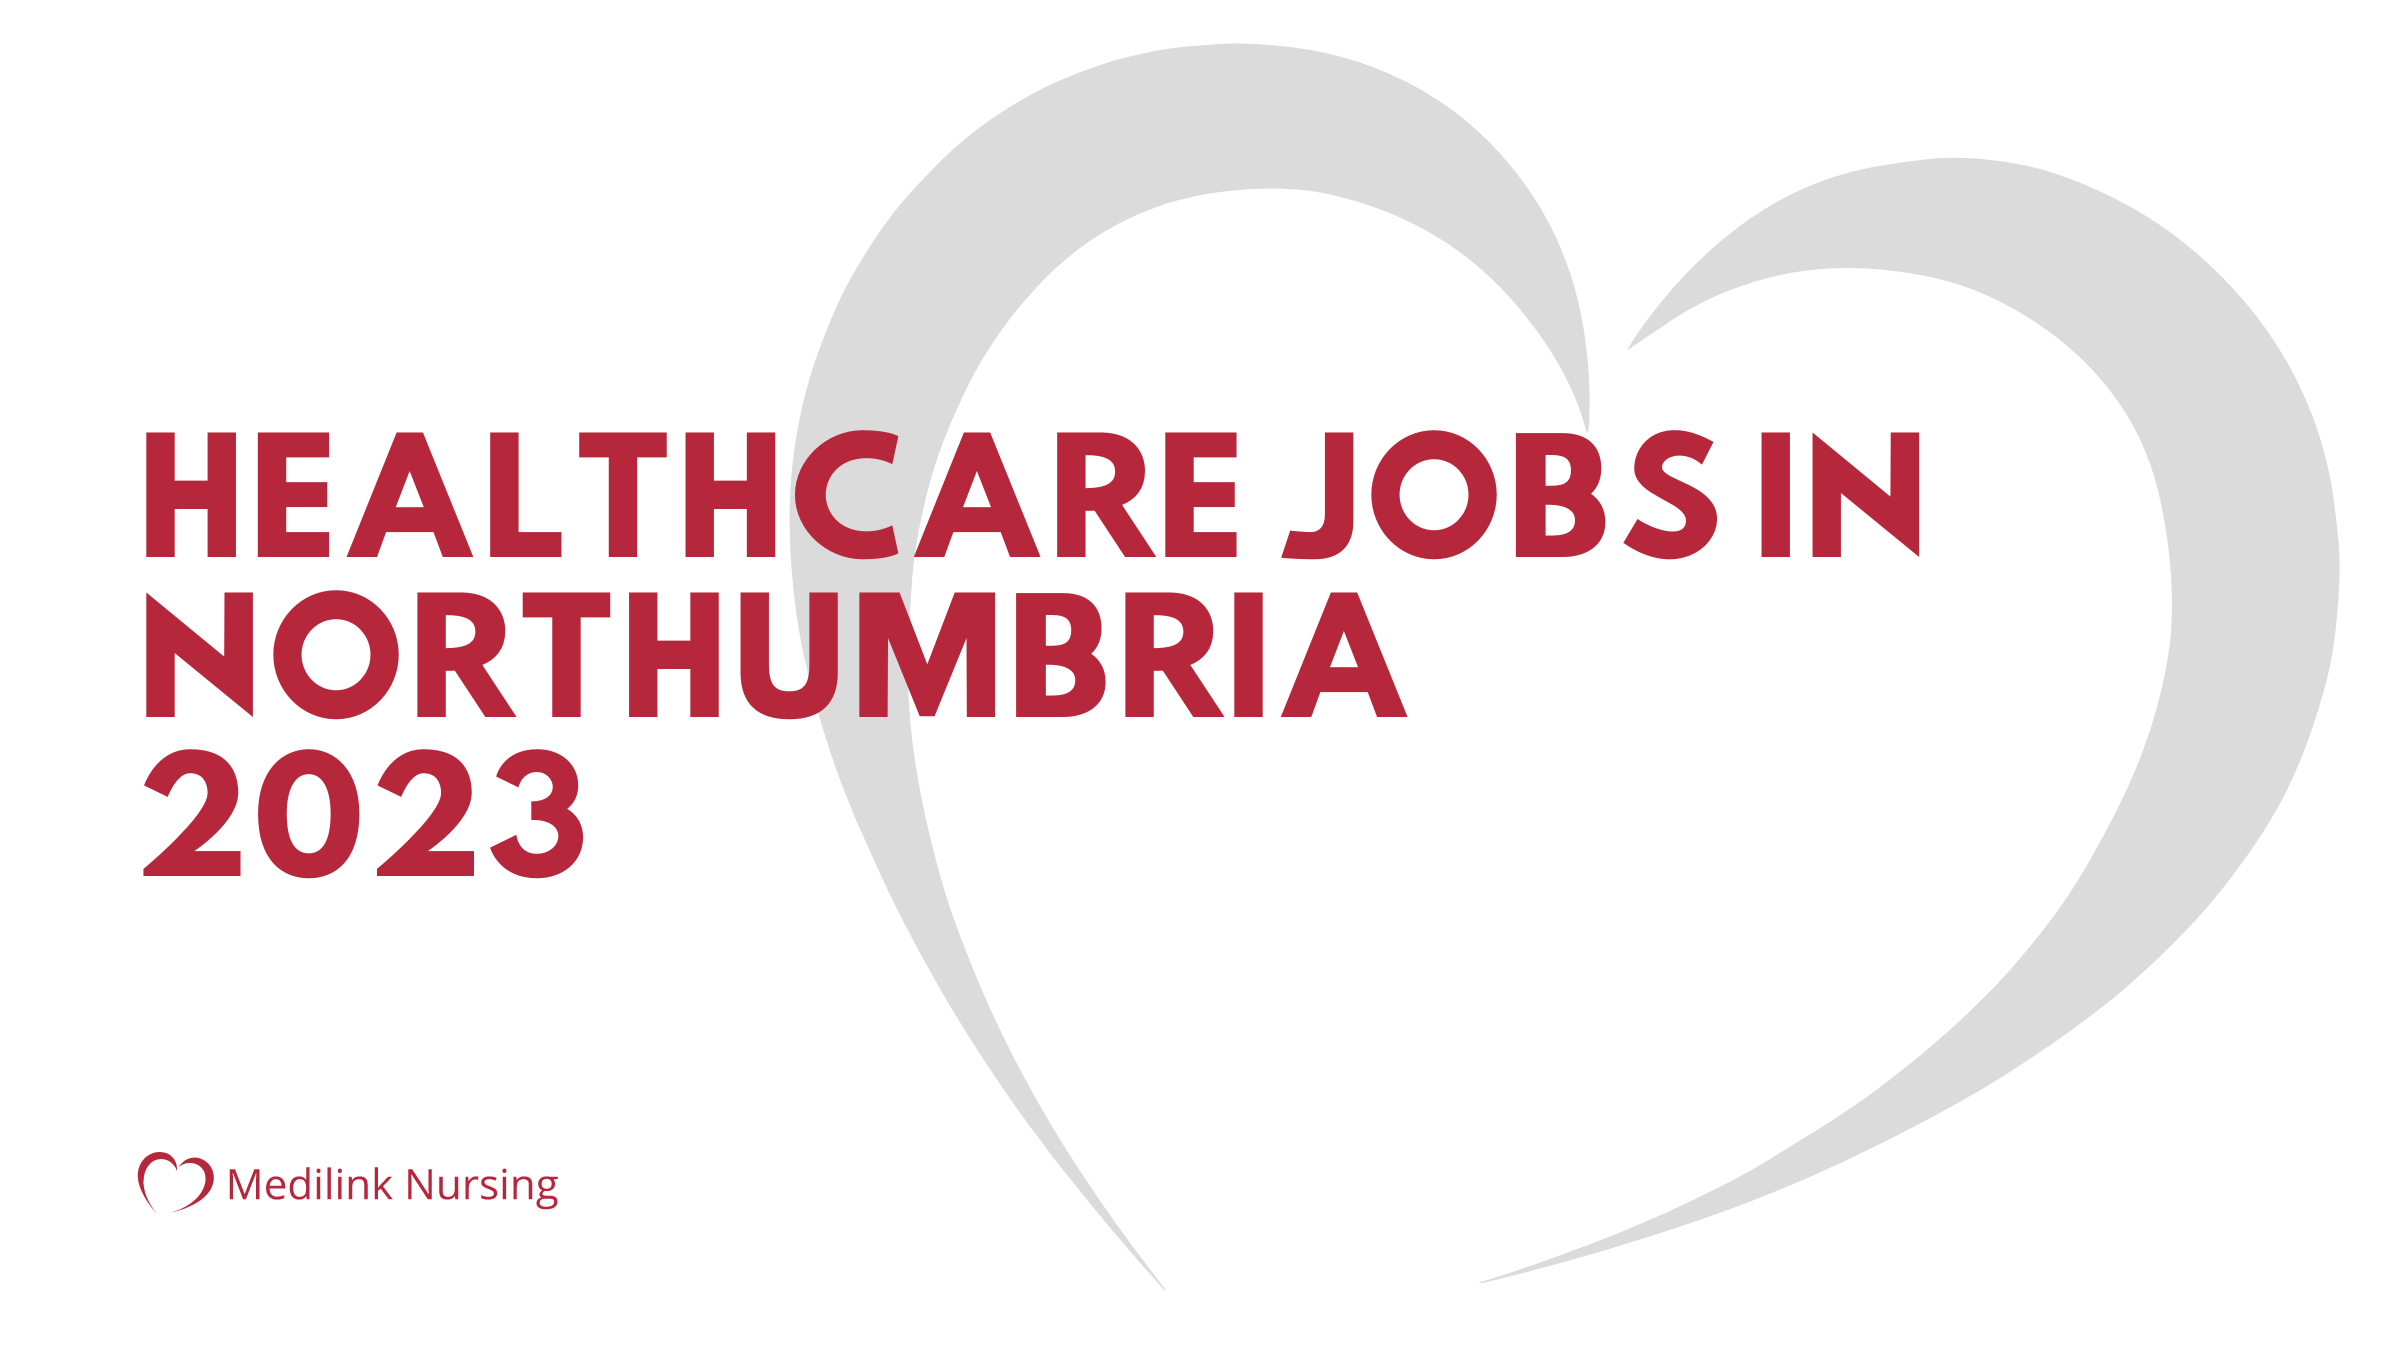 Apply For Northumbria Healthcare Jobs With Medilink Nursing! 2023